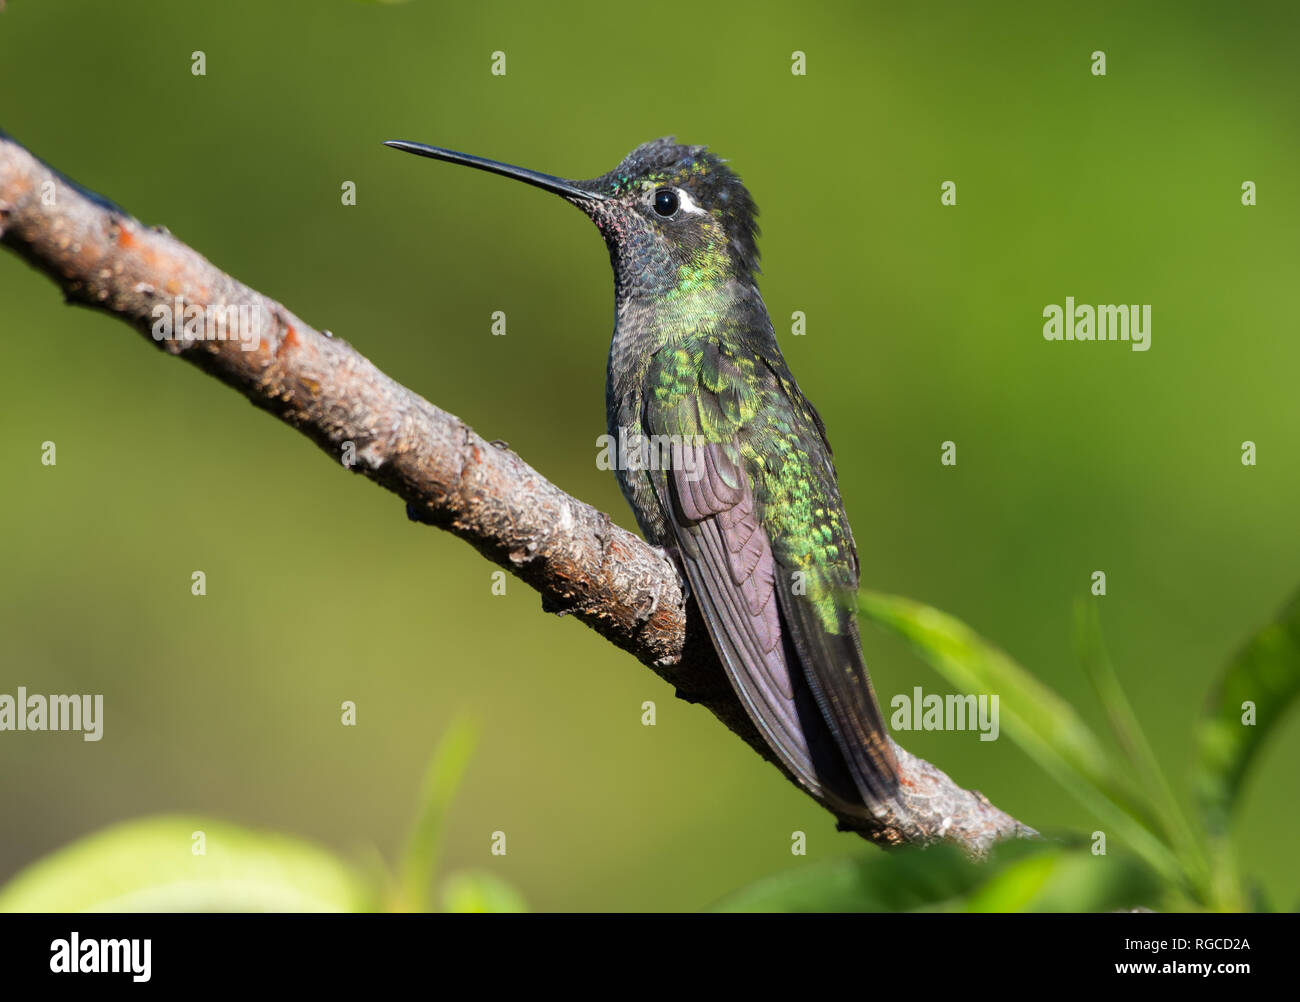 A Talamanca Hummingbird (Eugenes spectabilis) perched on a branch. Costa Rica, Central America. Stock Photo